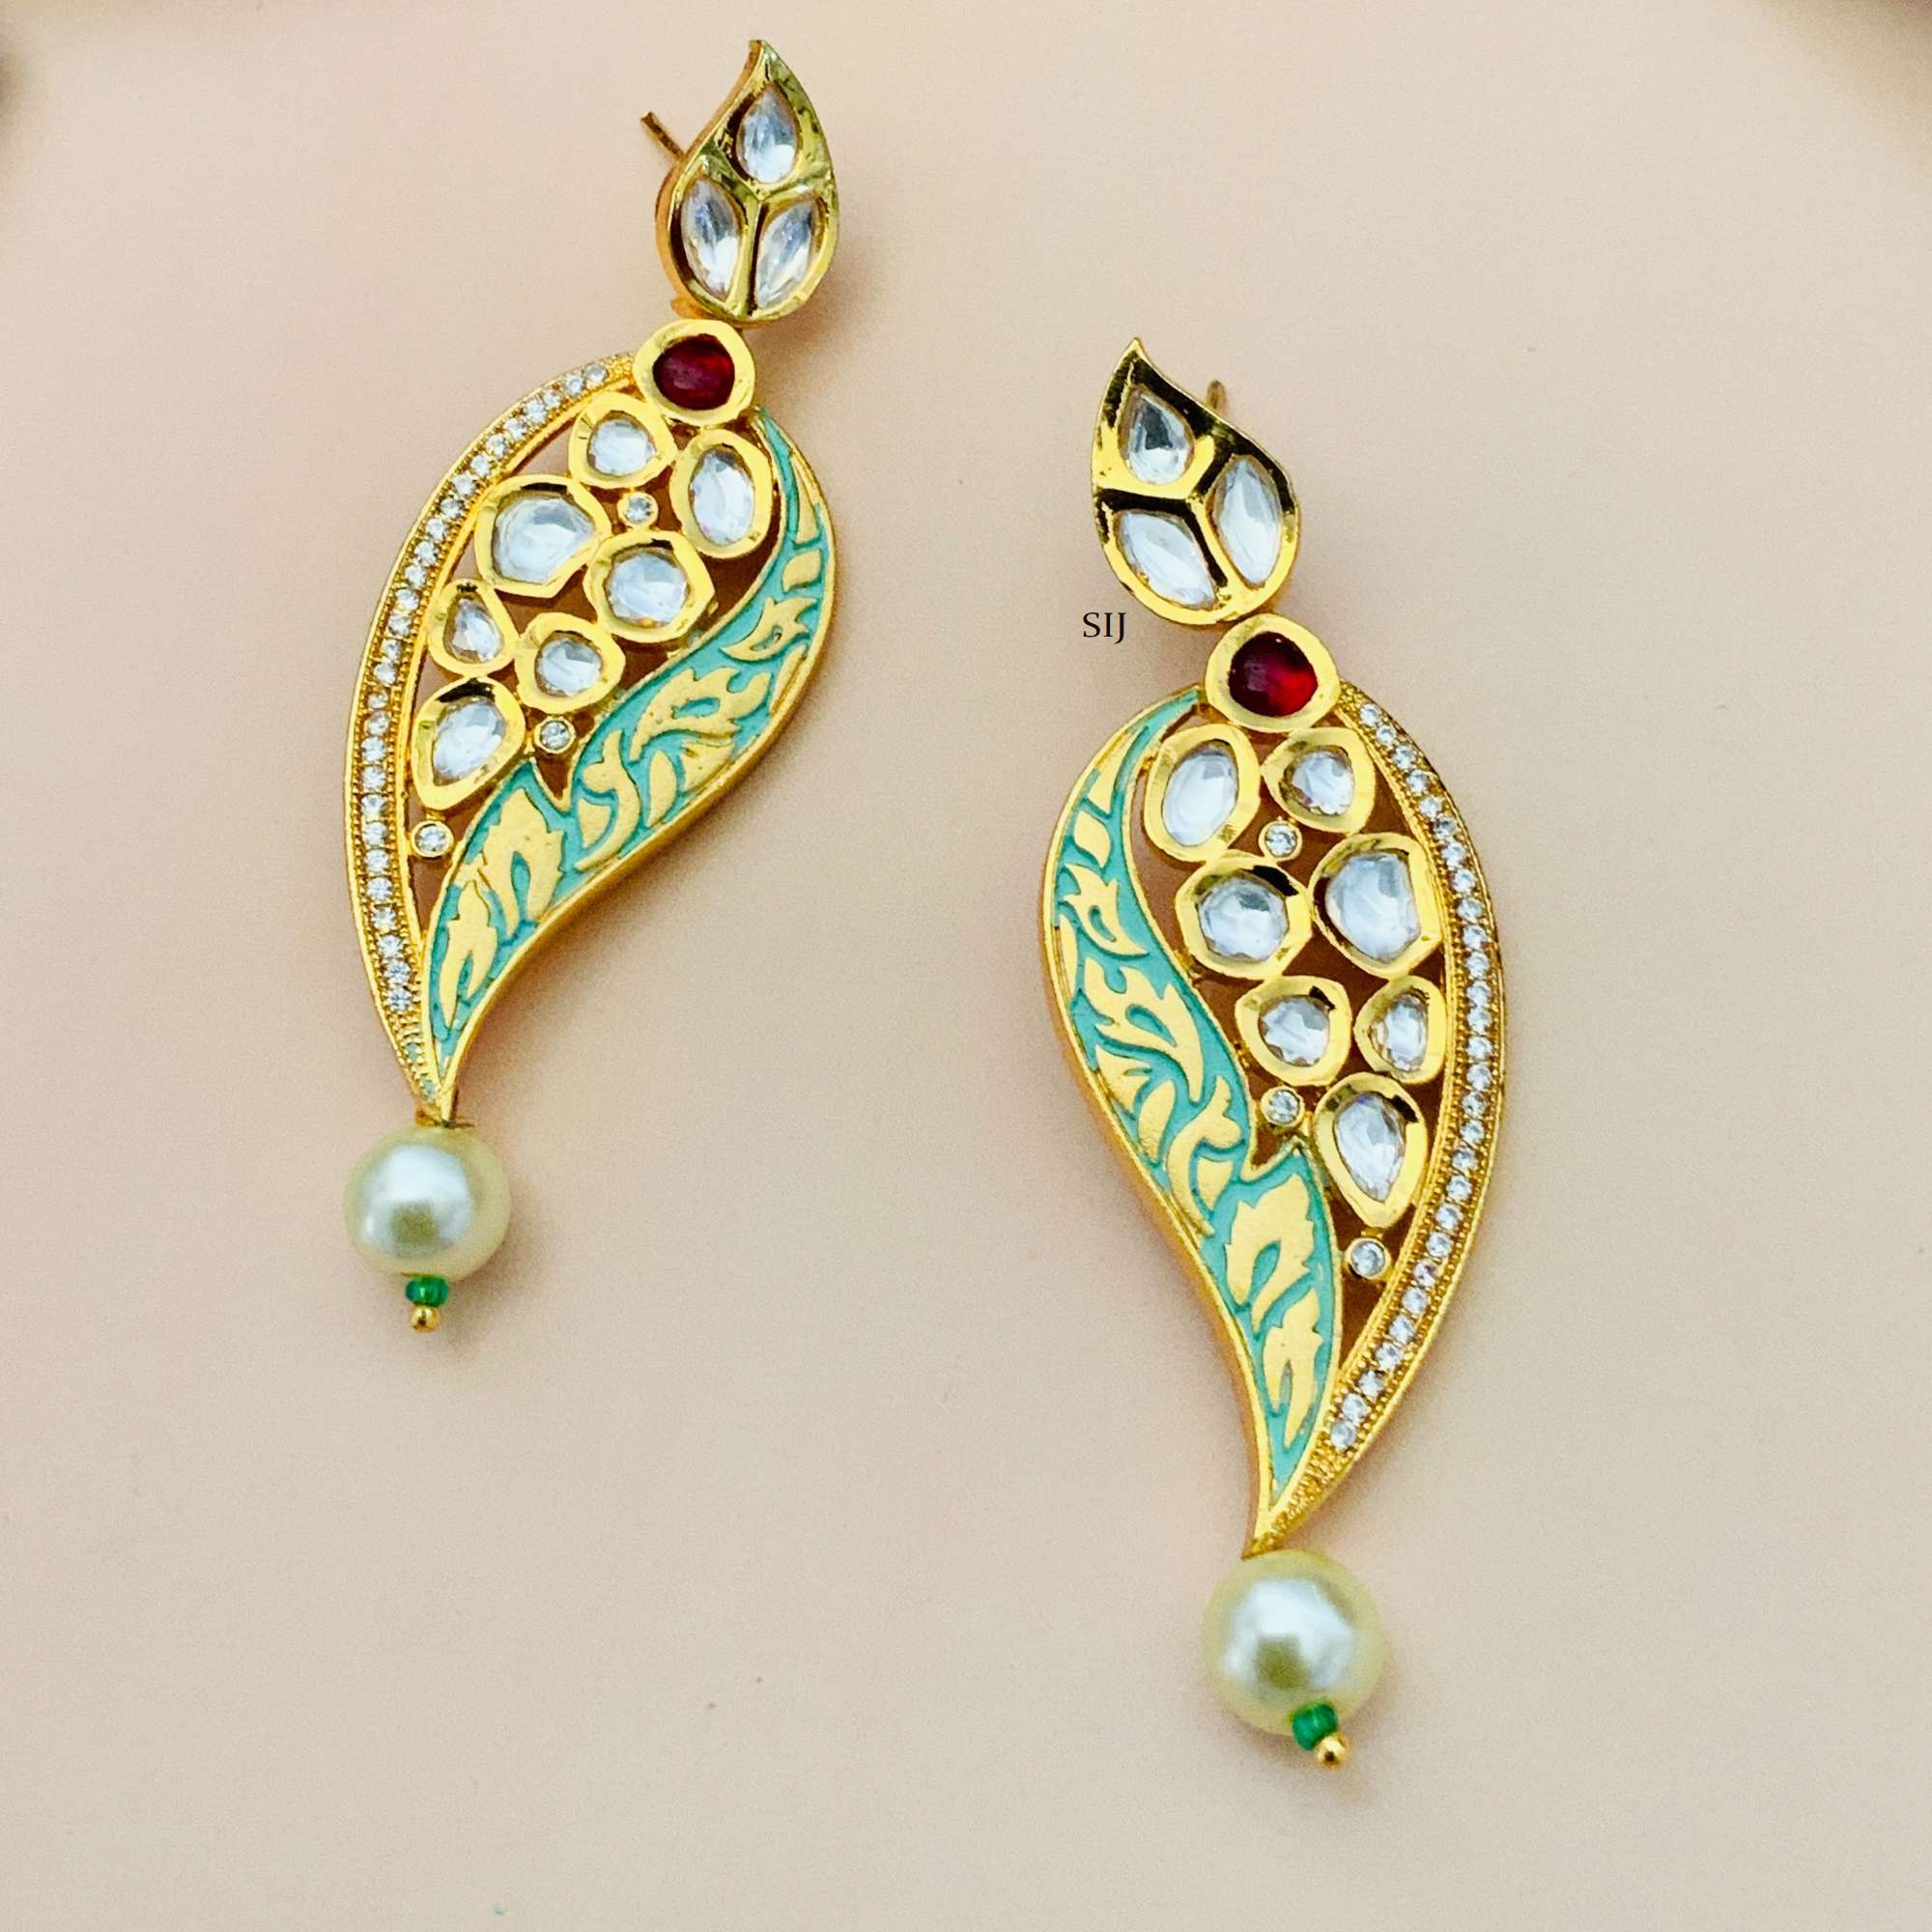 Matte Finish Leaf Design Kundan Earrings with Red Stone